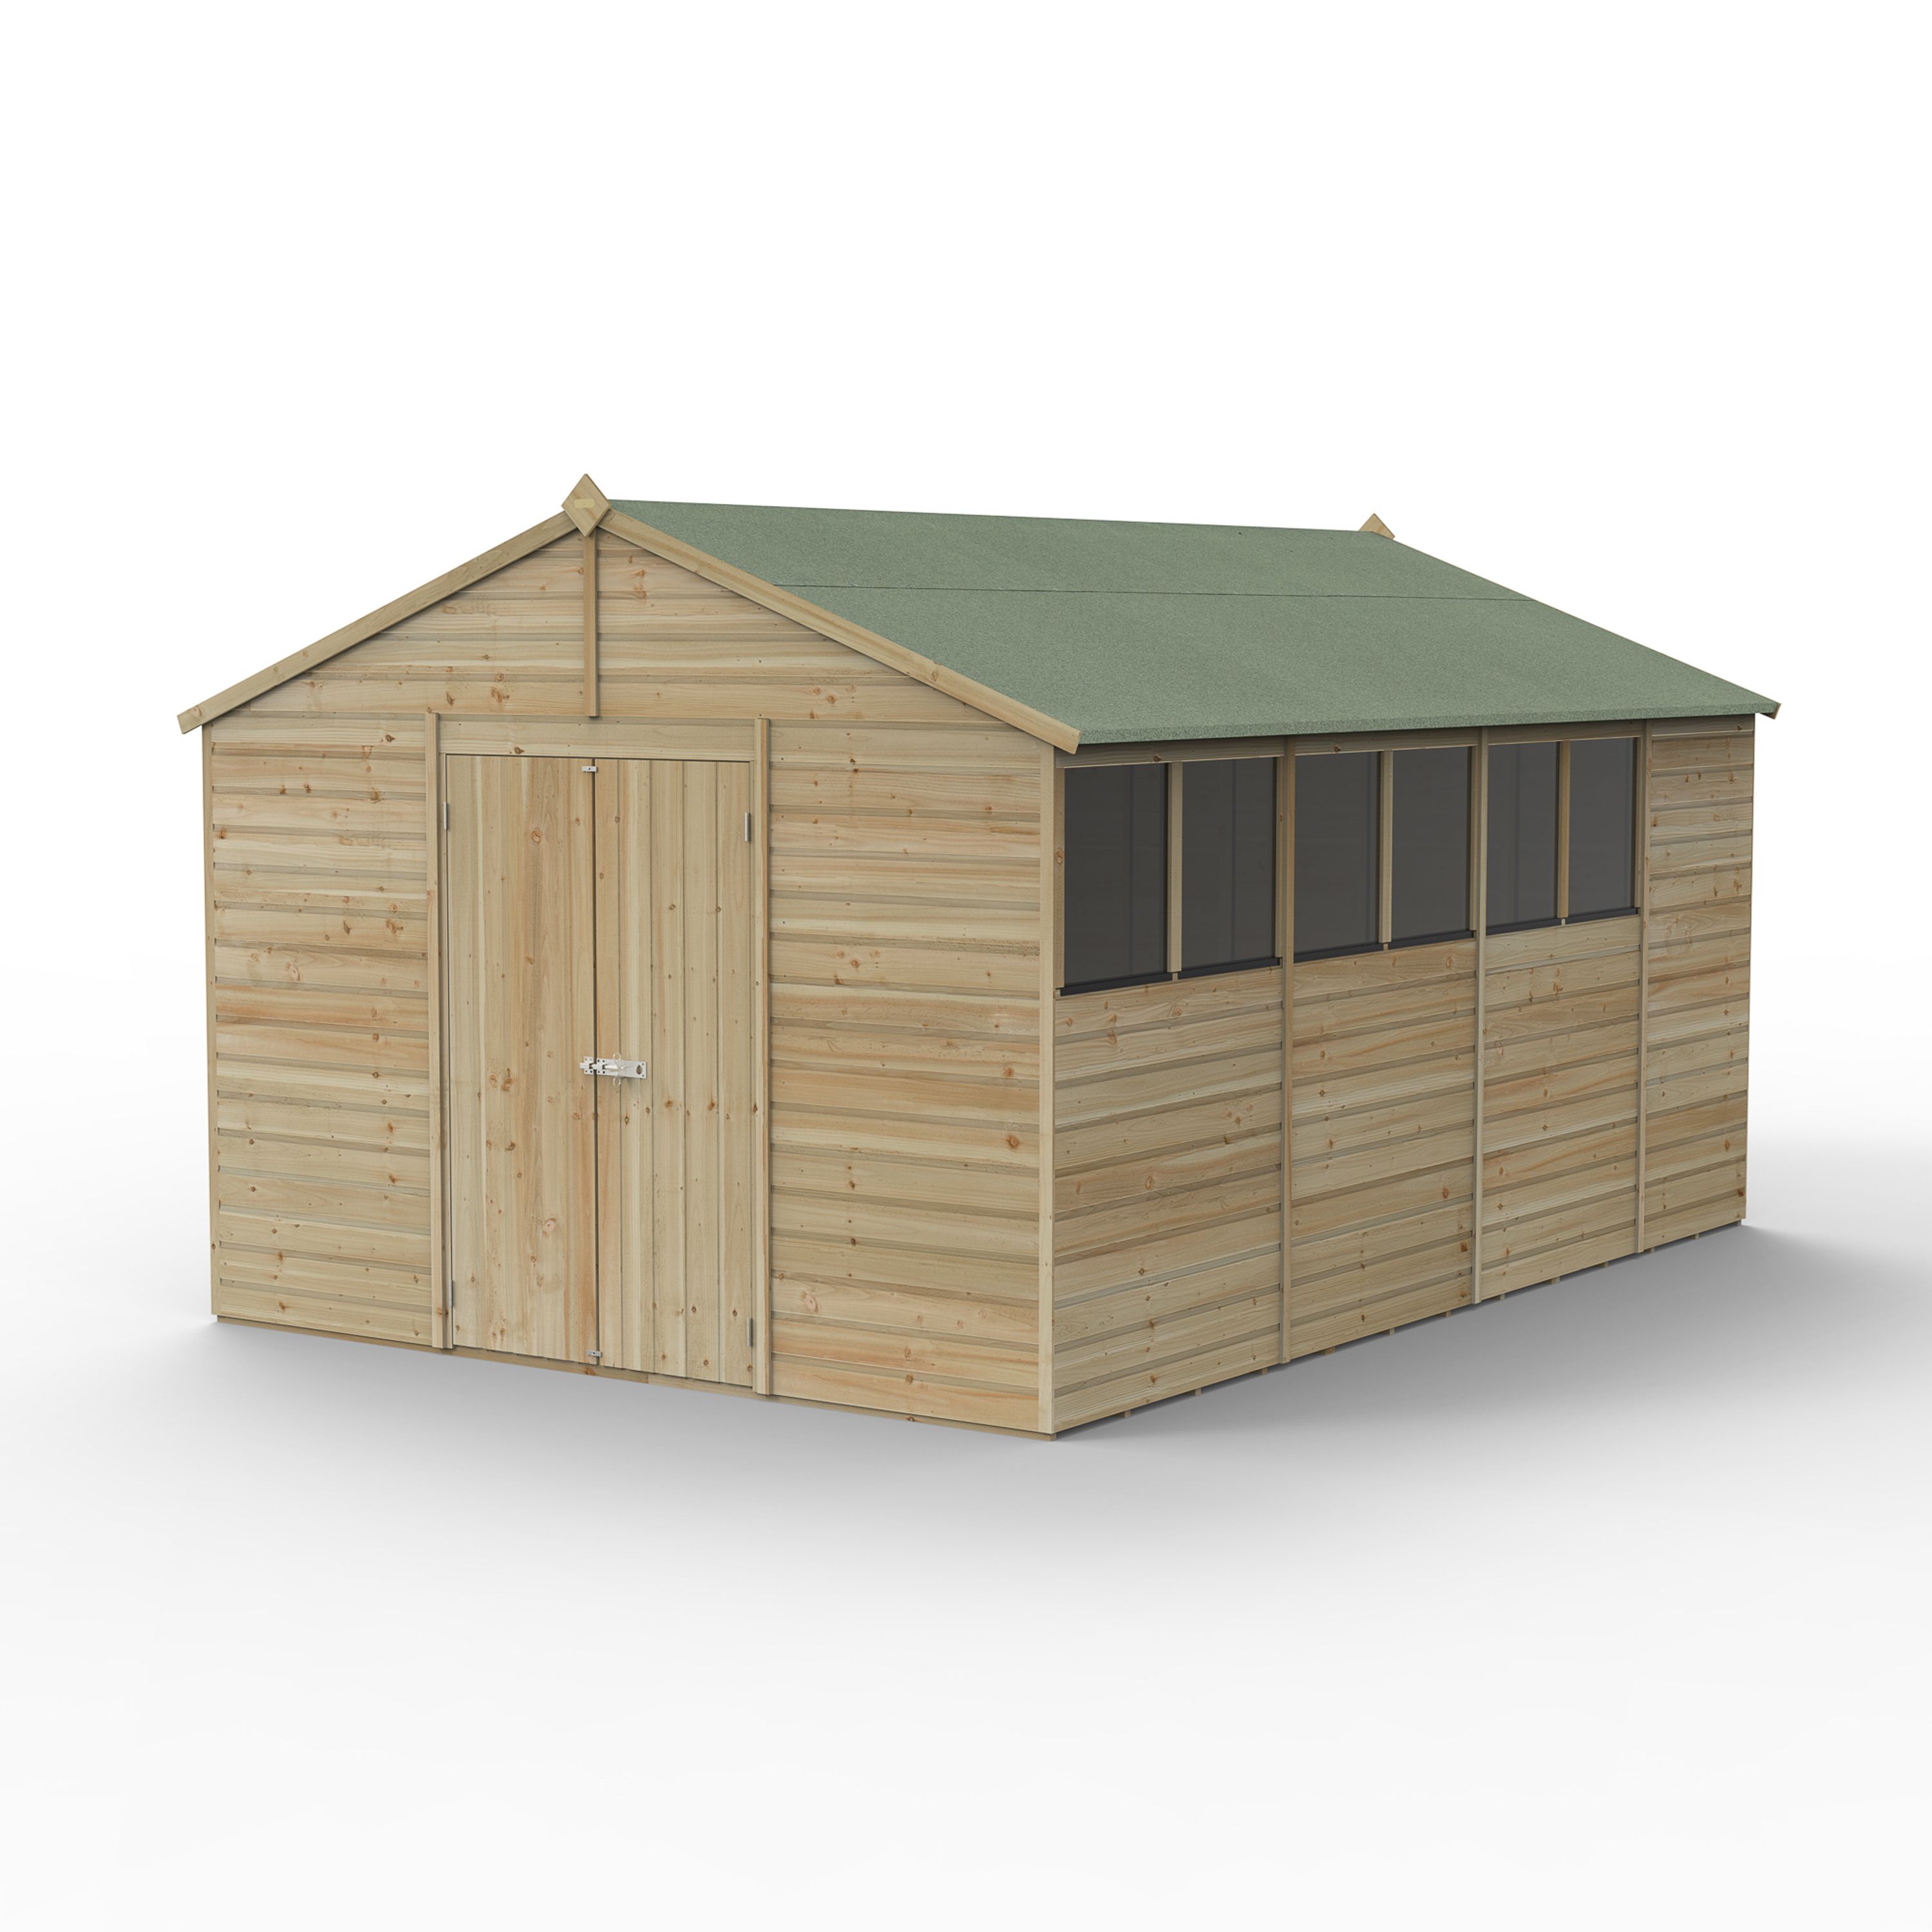 Forest Garden Beckwood 10x15 ft Apex Natural timber Wooden 2 door Shed with floor & 6 windows - Assembly not required